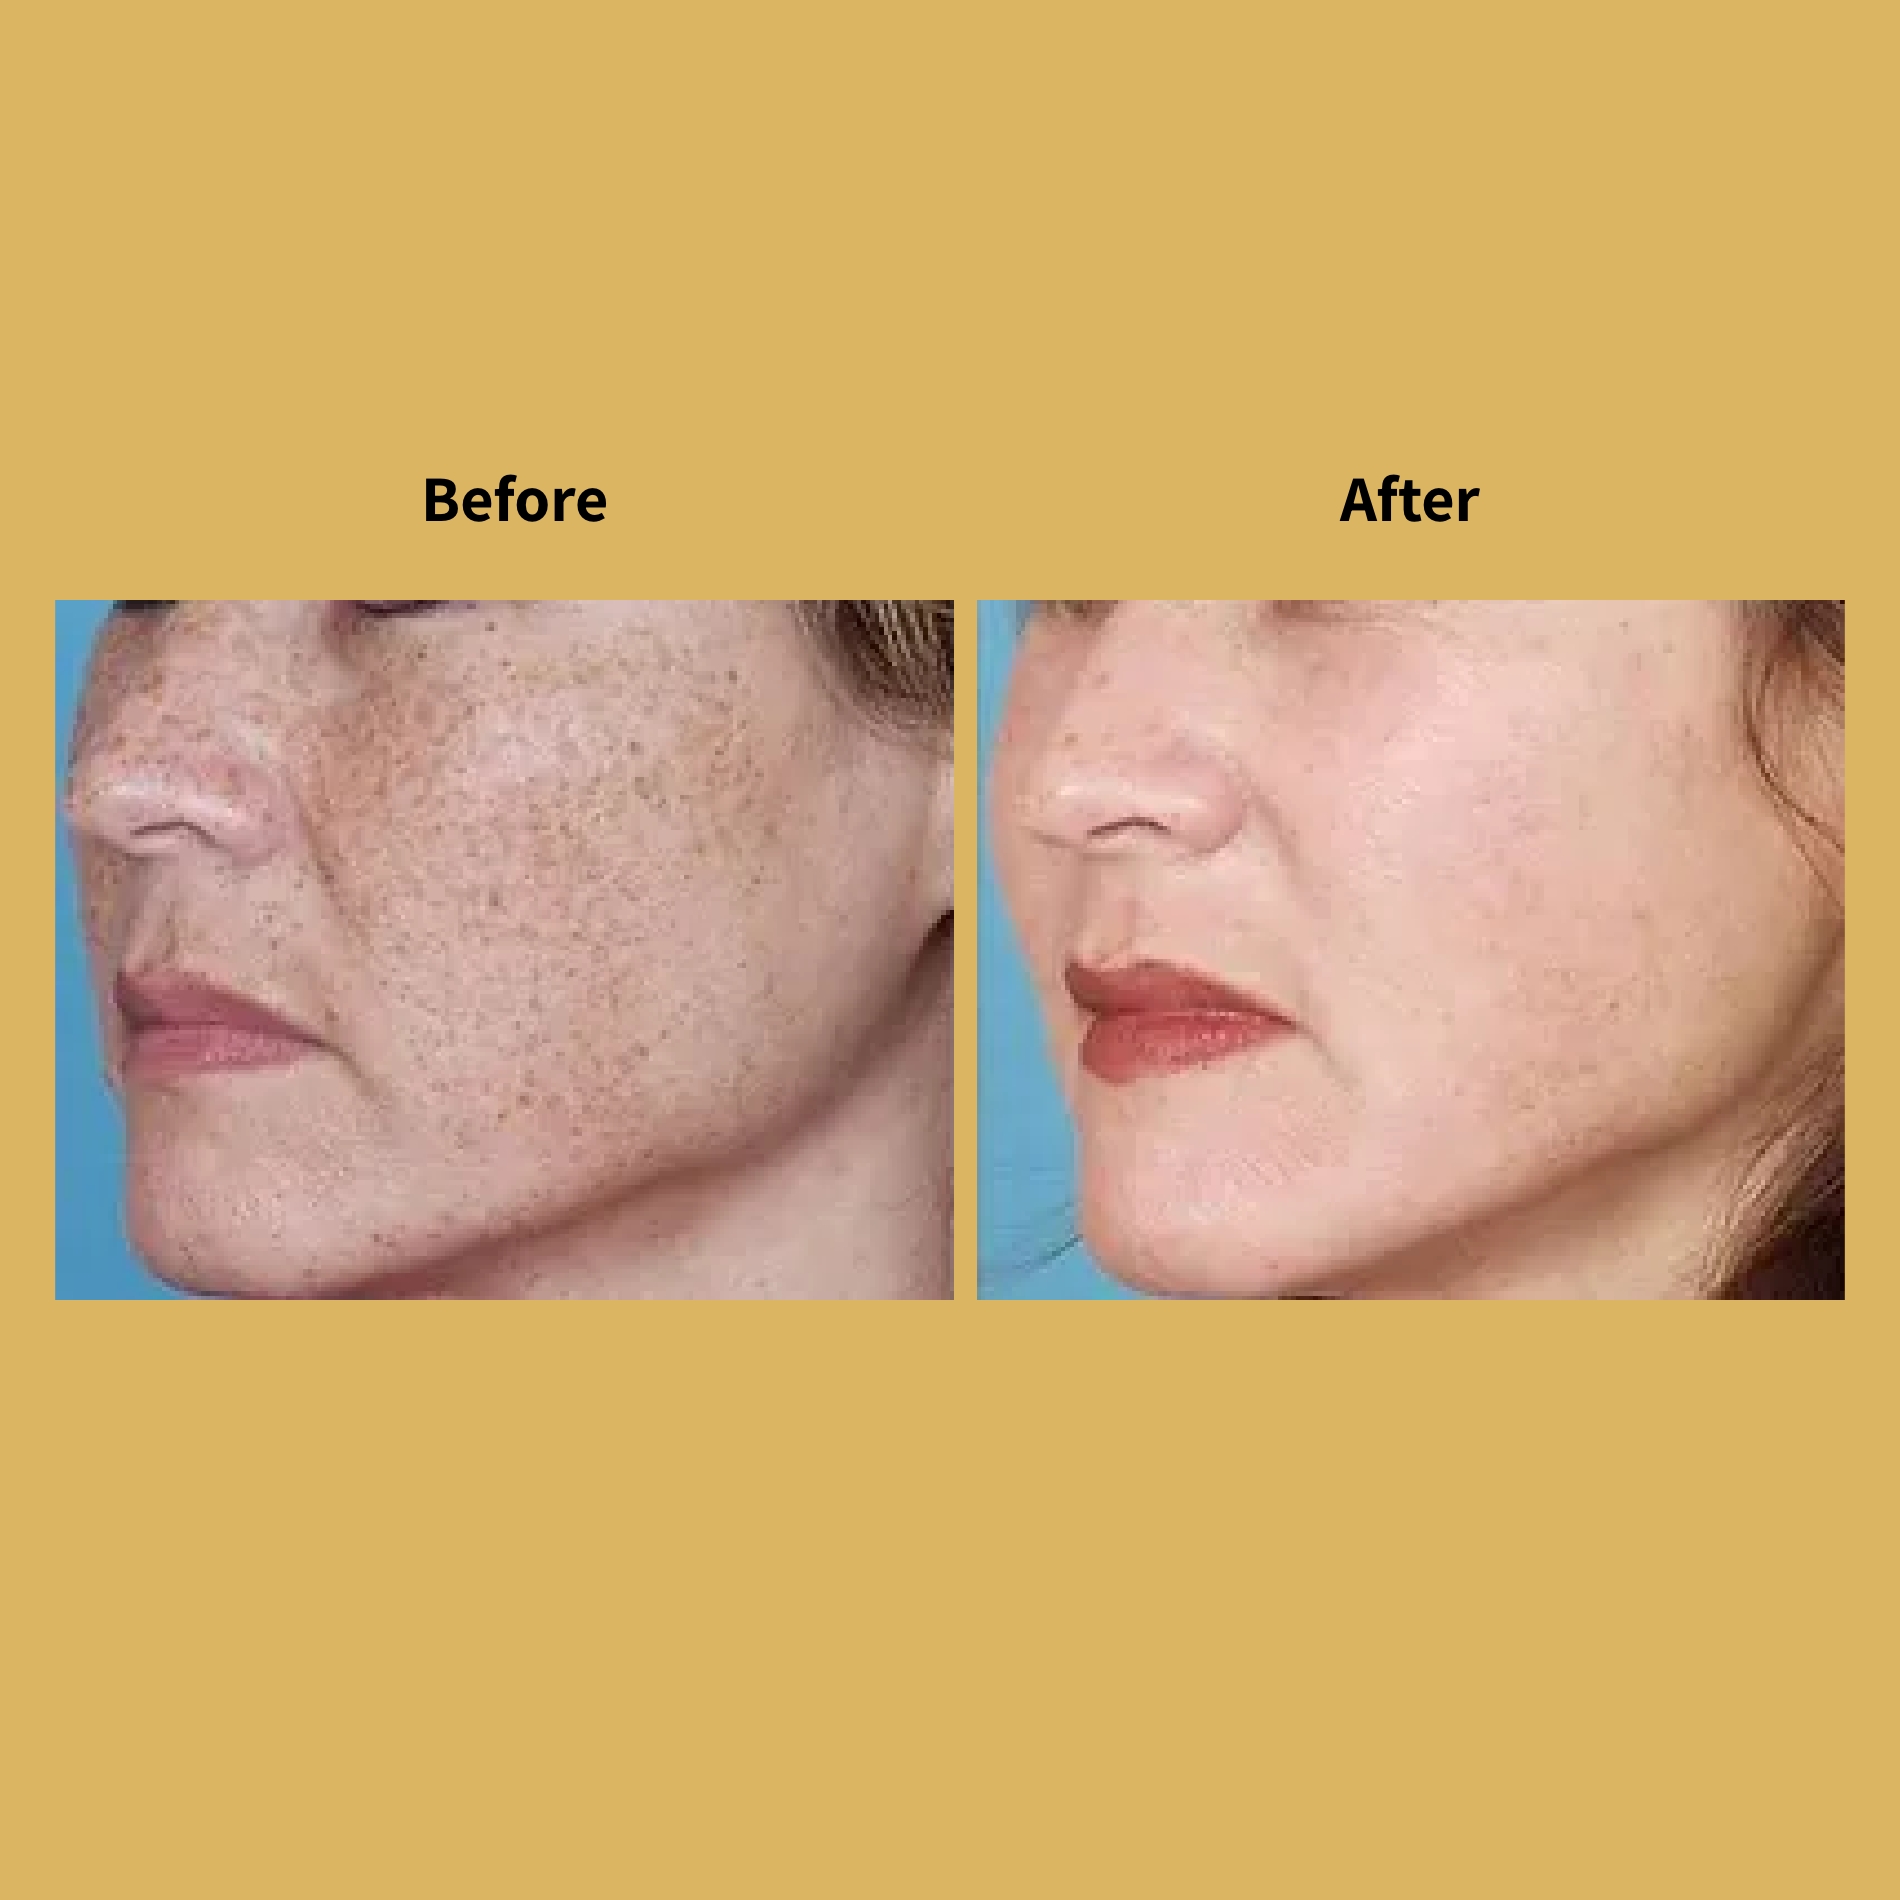 Female Laser Rejuvenation Before and After Treatment Photos | Soleil Medical & Beauty Spa in Portland, OR